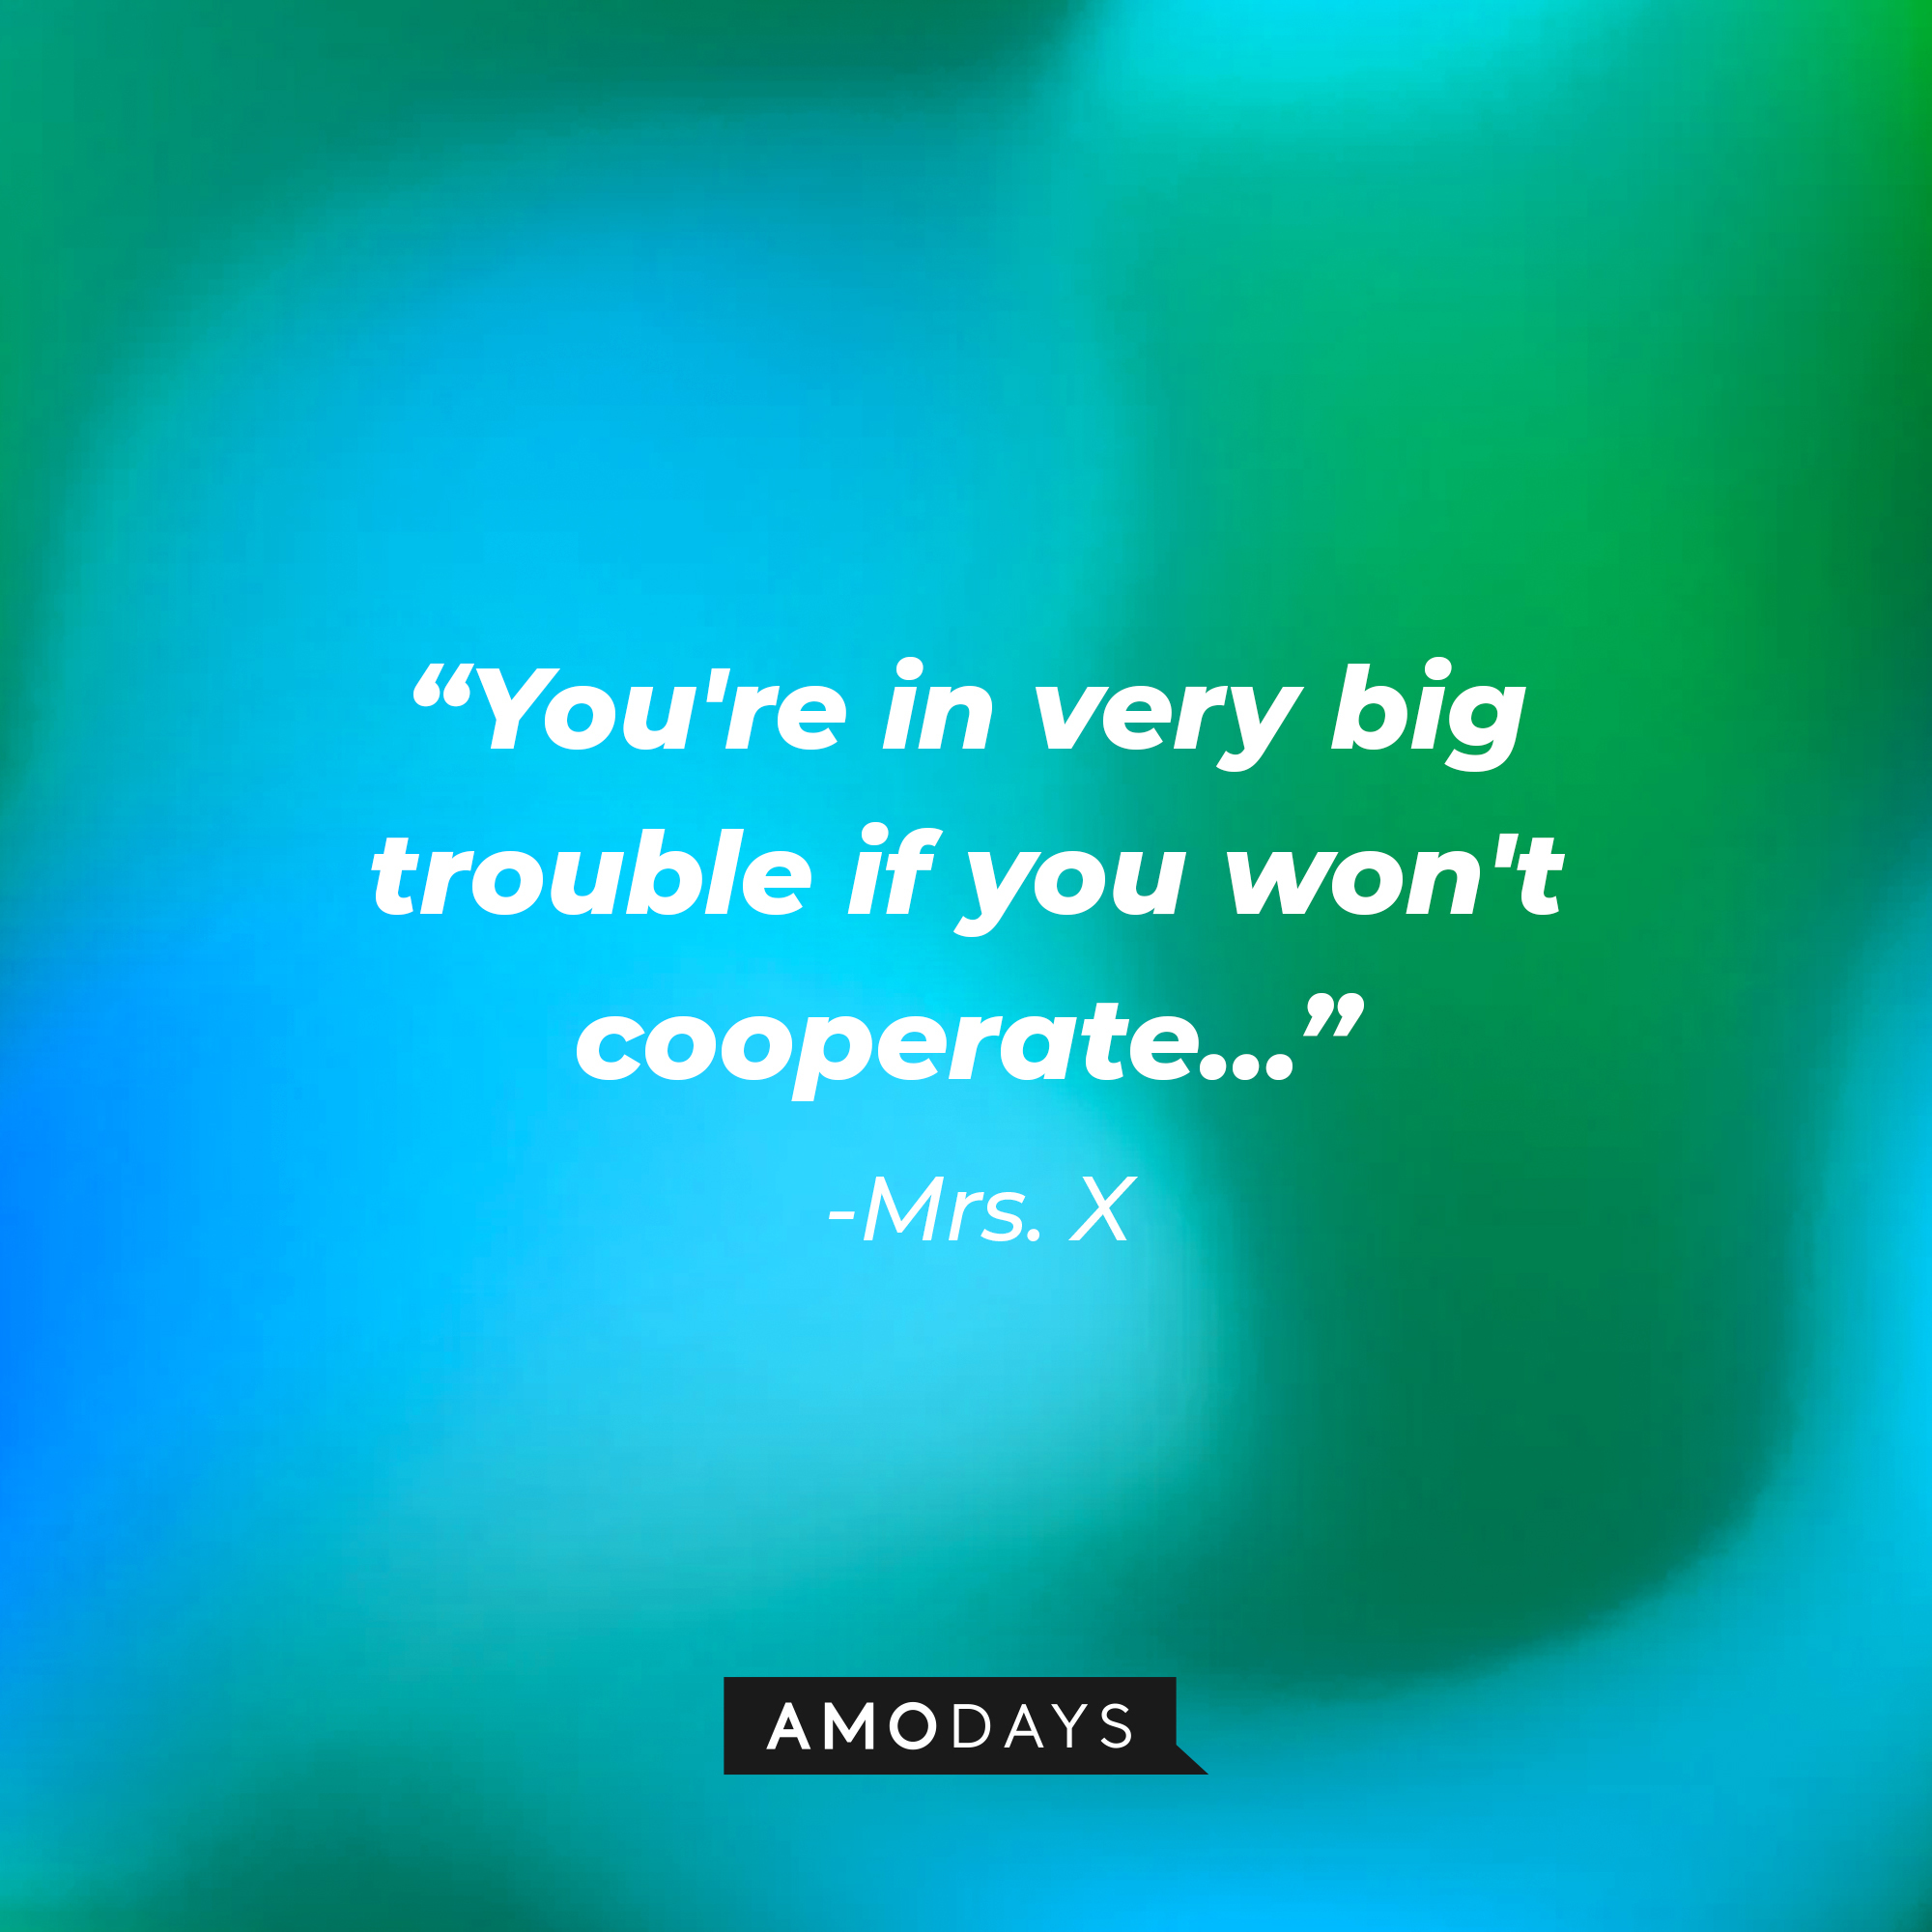 Mrs. X’s quote: “You're in very big trouble if you won't cooperate…”  |  Source: AmoDays